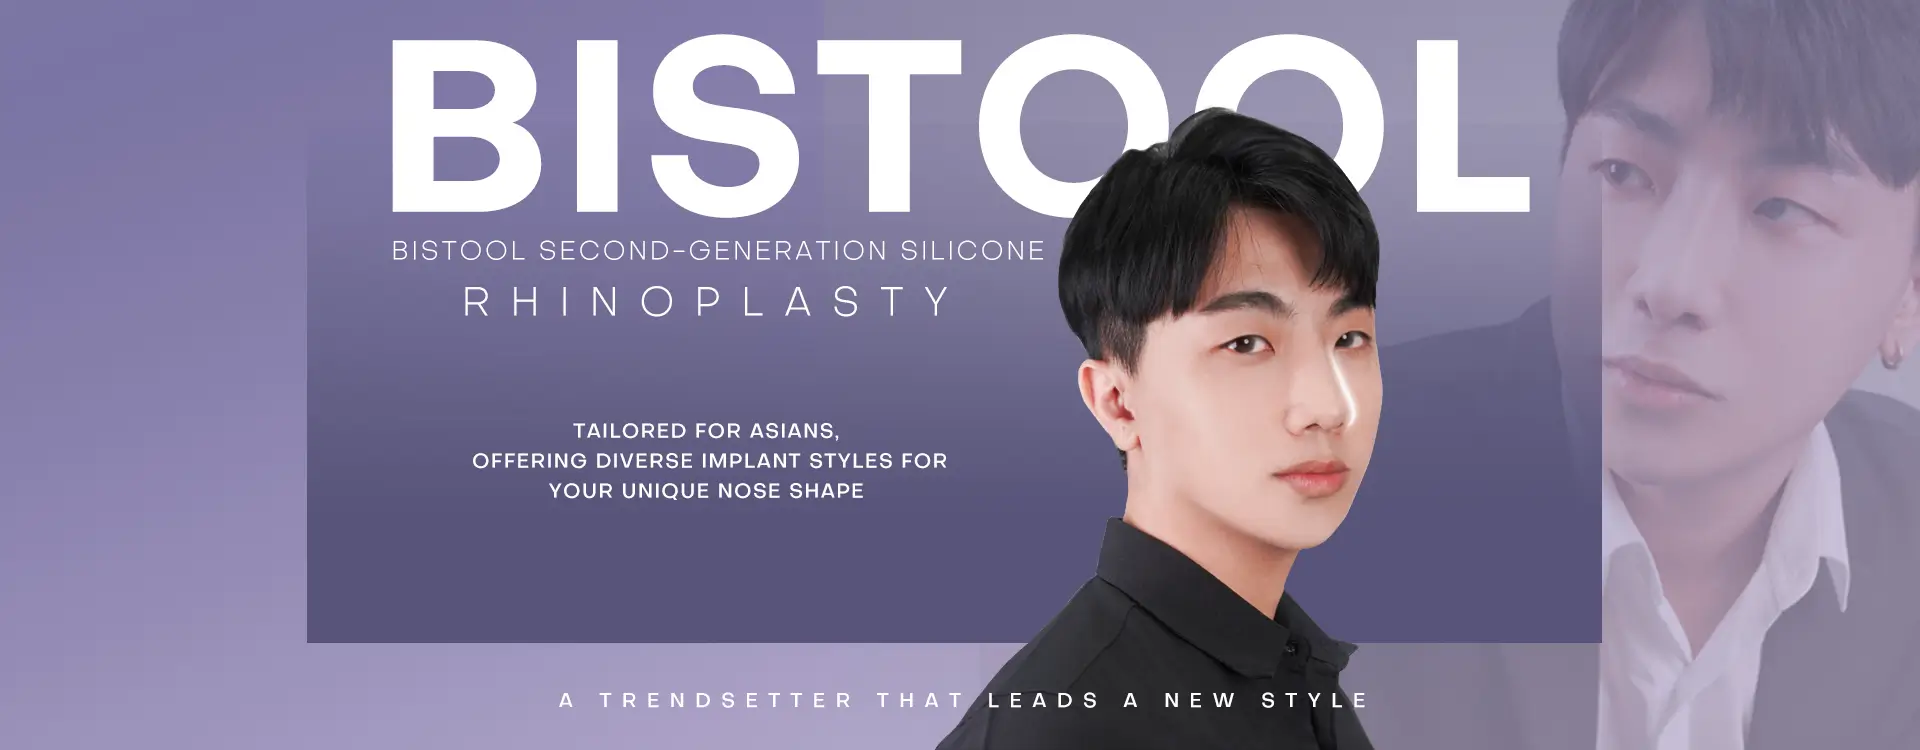 Bistool Second-Generation Silicone Rhinoplasty | Tailored for Asians, offering diverse implant styles for your unique nose shape.